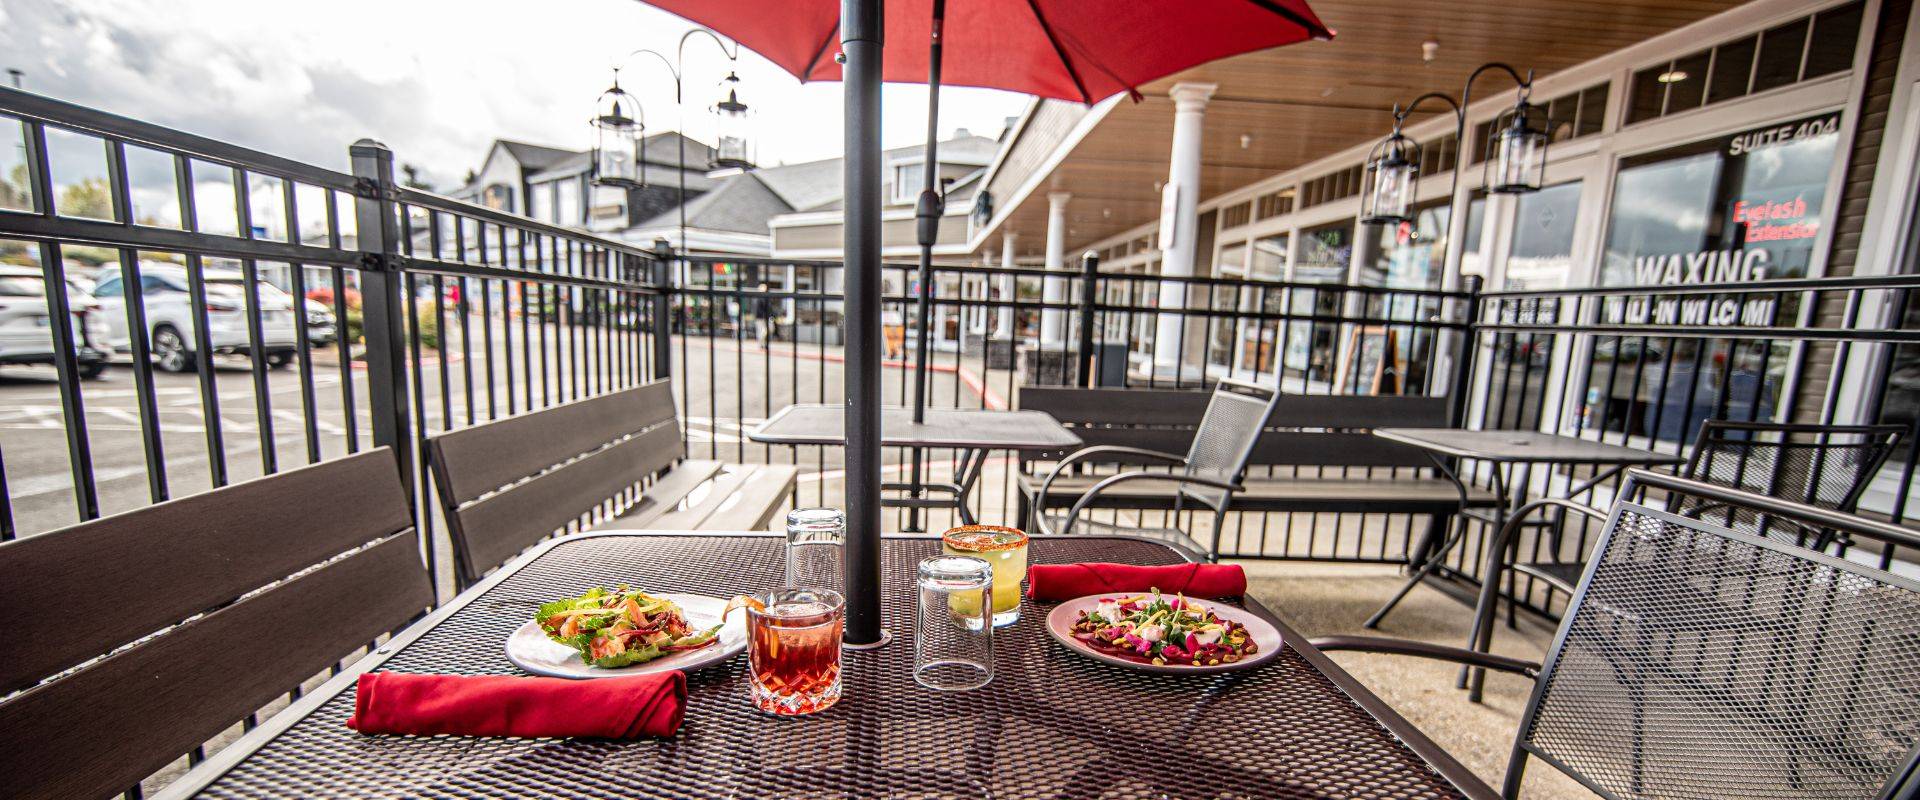 Our patio in Mukilteo is open from late spring through early fall, weather depending.